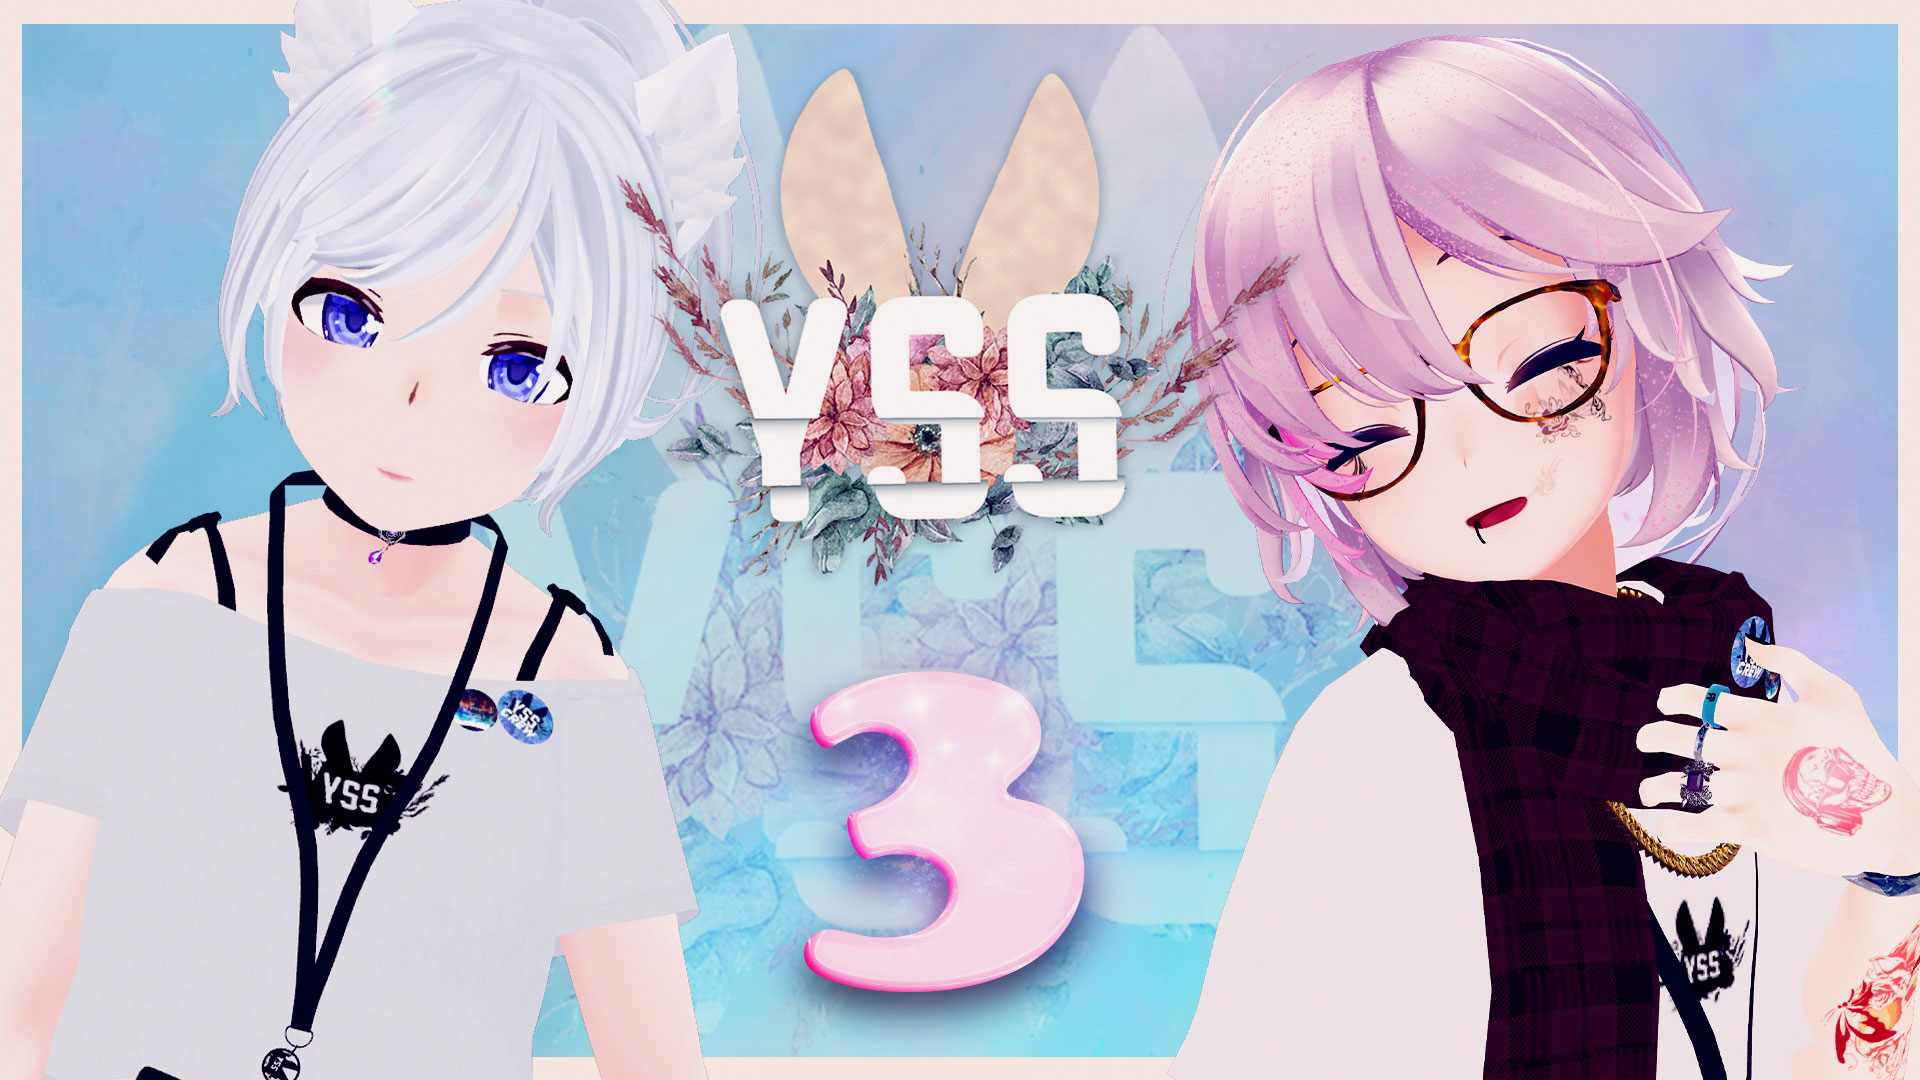 #YSS_HomeLive「YSS 3周年記念らいぶ vol.1」